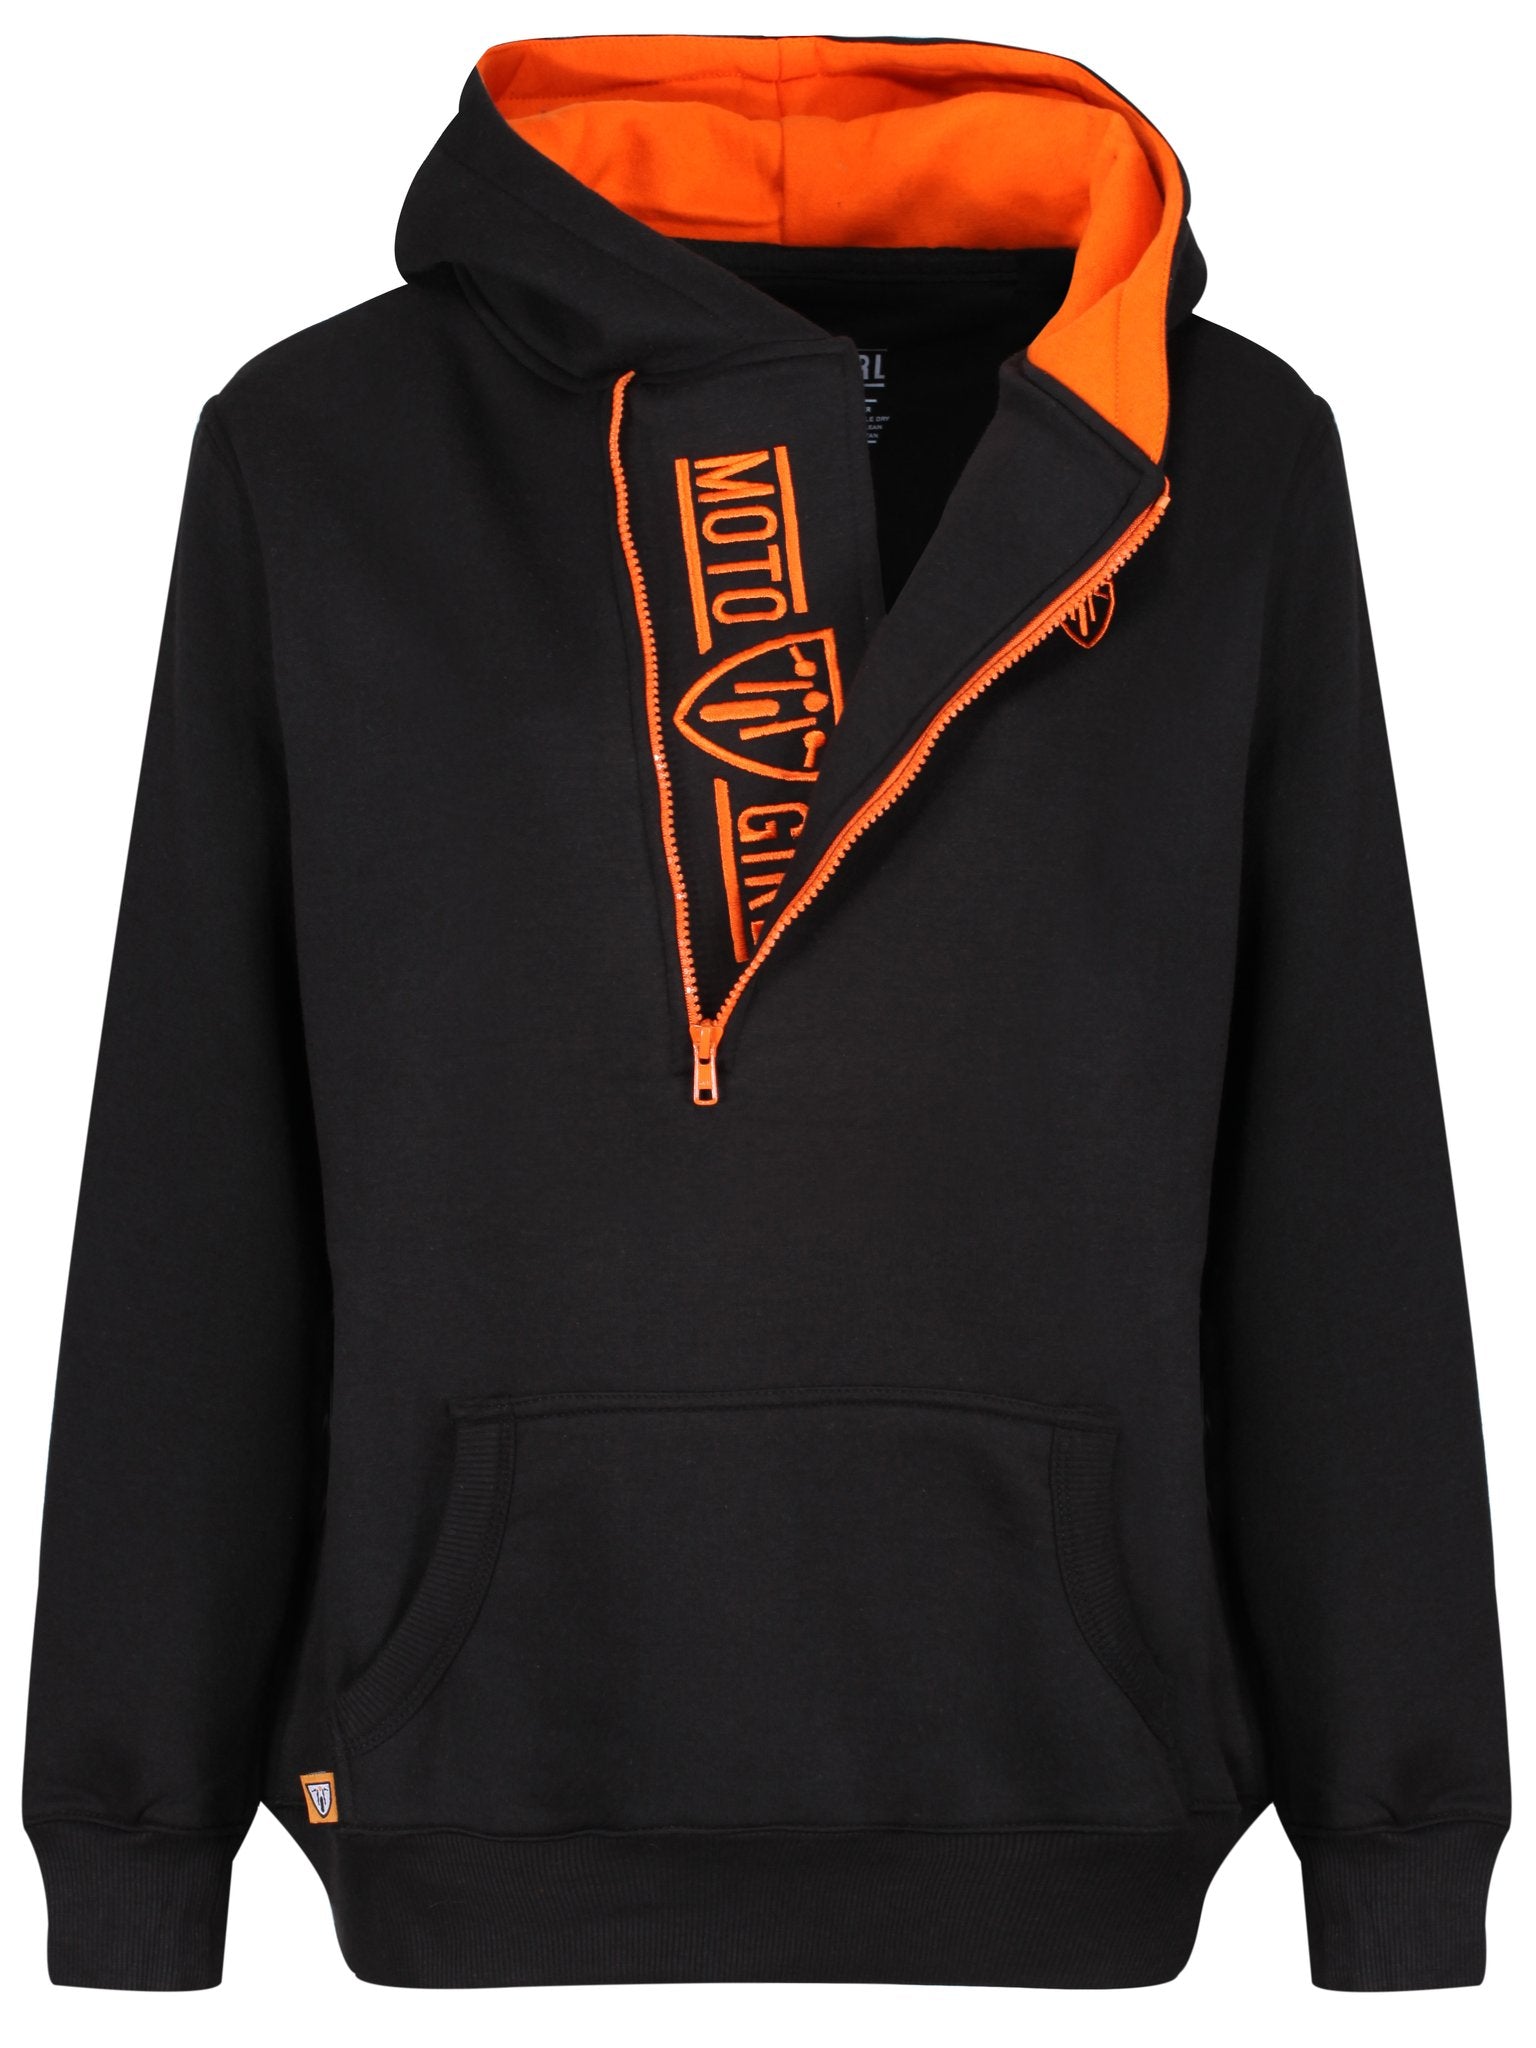 Black and orange motorcycle hoodie from MotoGirl with a long zip